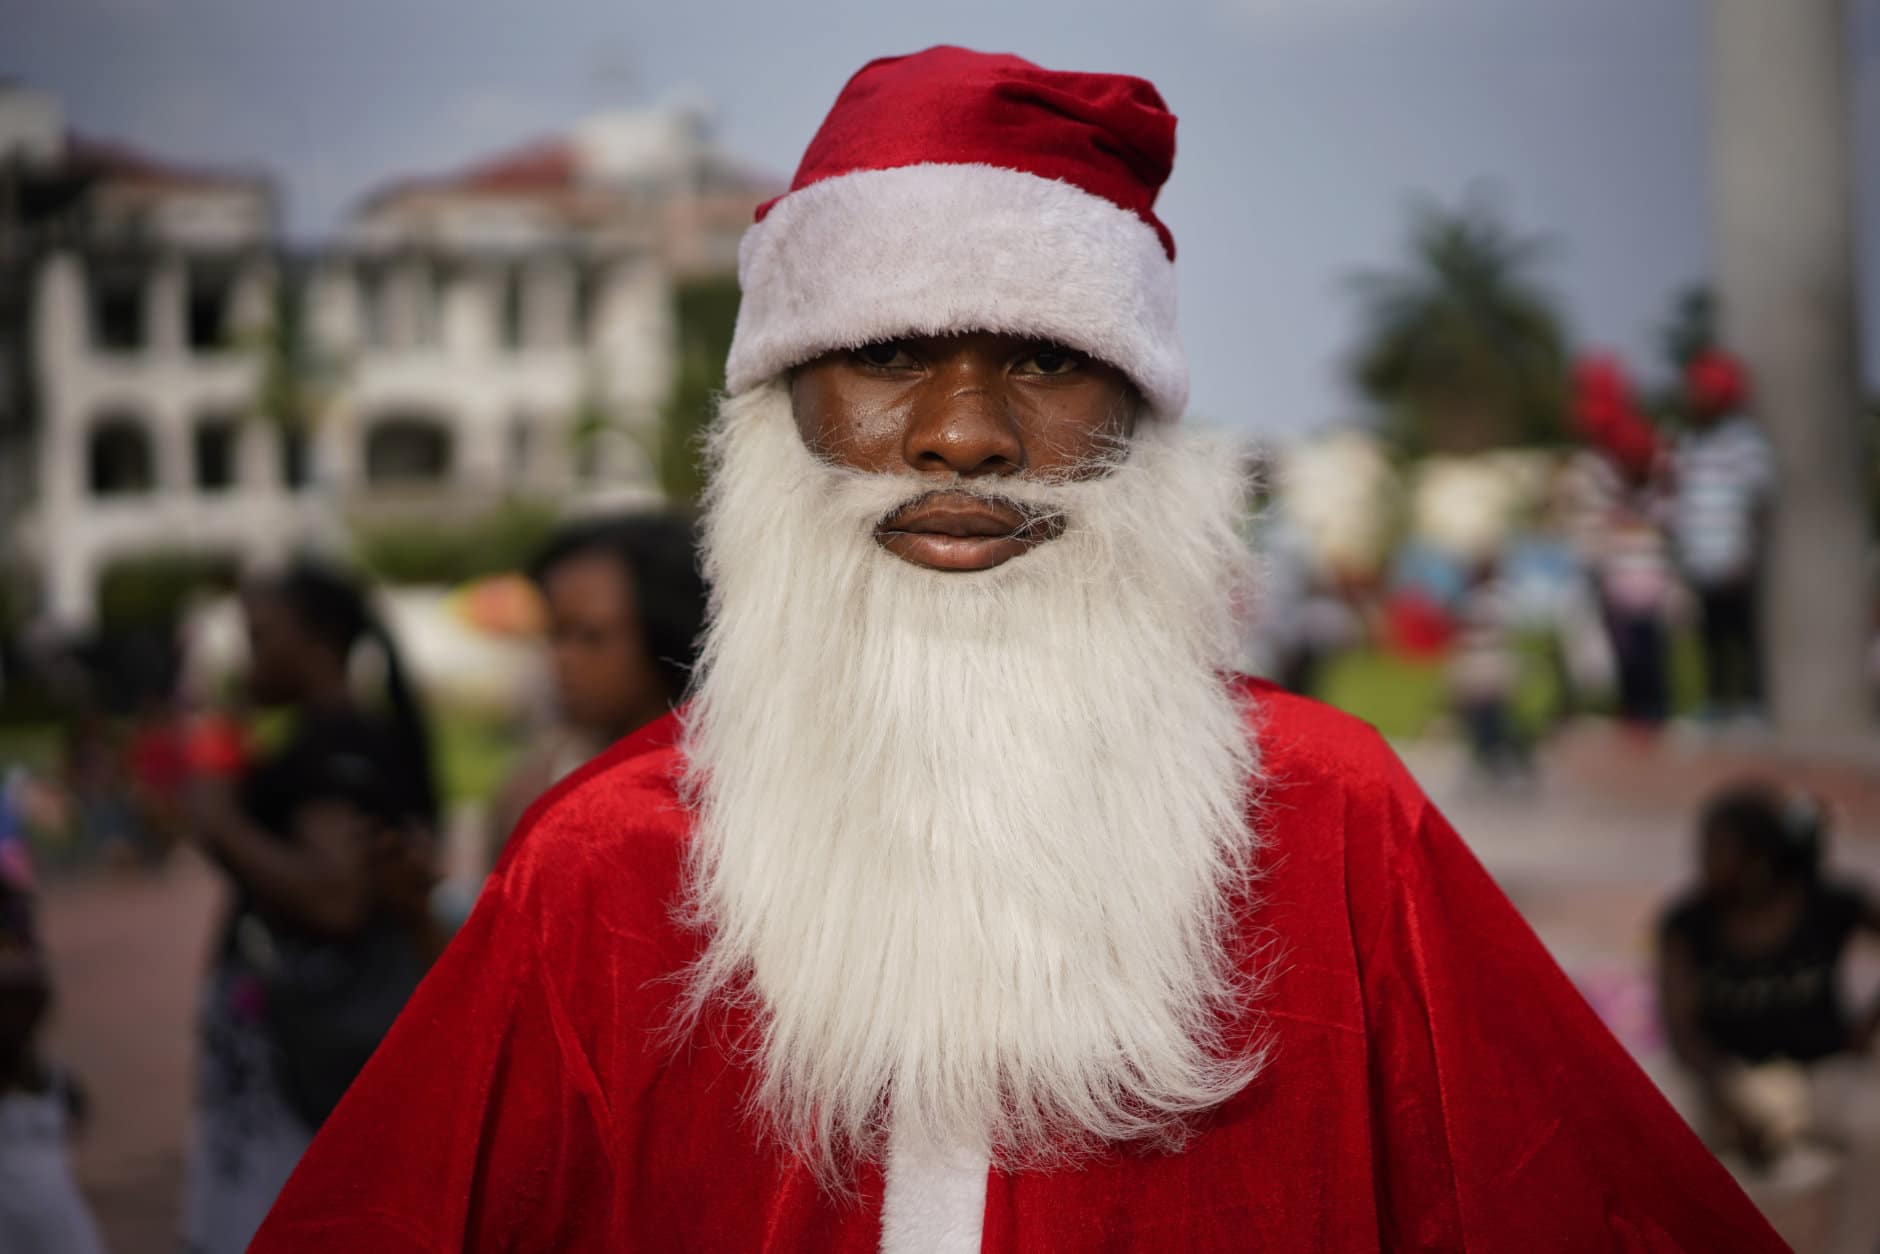 A Congolese Santa Claus waits to pose with children in Kinshasa, Congo, Tuesday Dec. 25, 2018. Traditionally Congolese dress up and take to the parks on Christmas day, this time five days before scheduled presidential and general elections. (AP Photo/Jerome Delay)